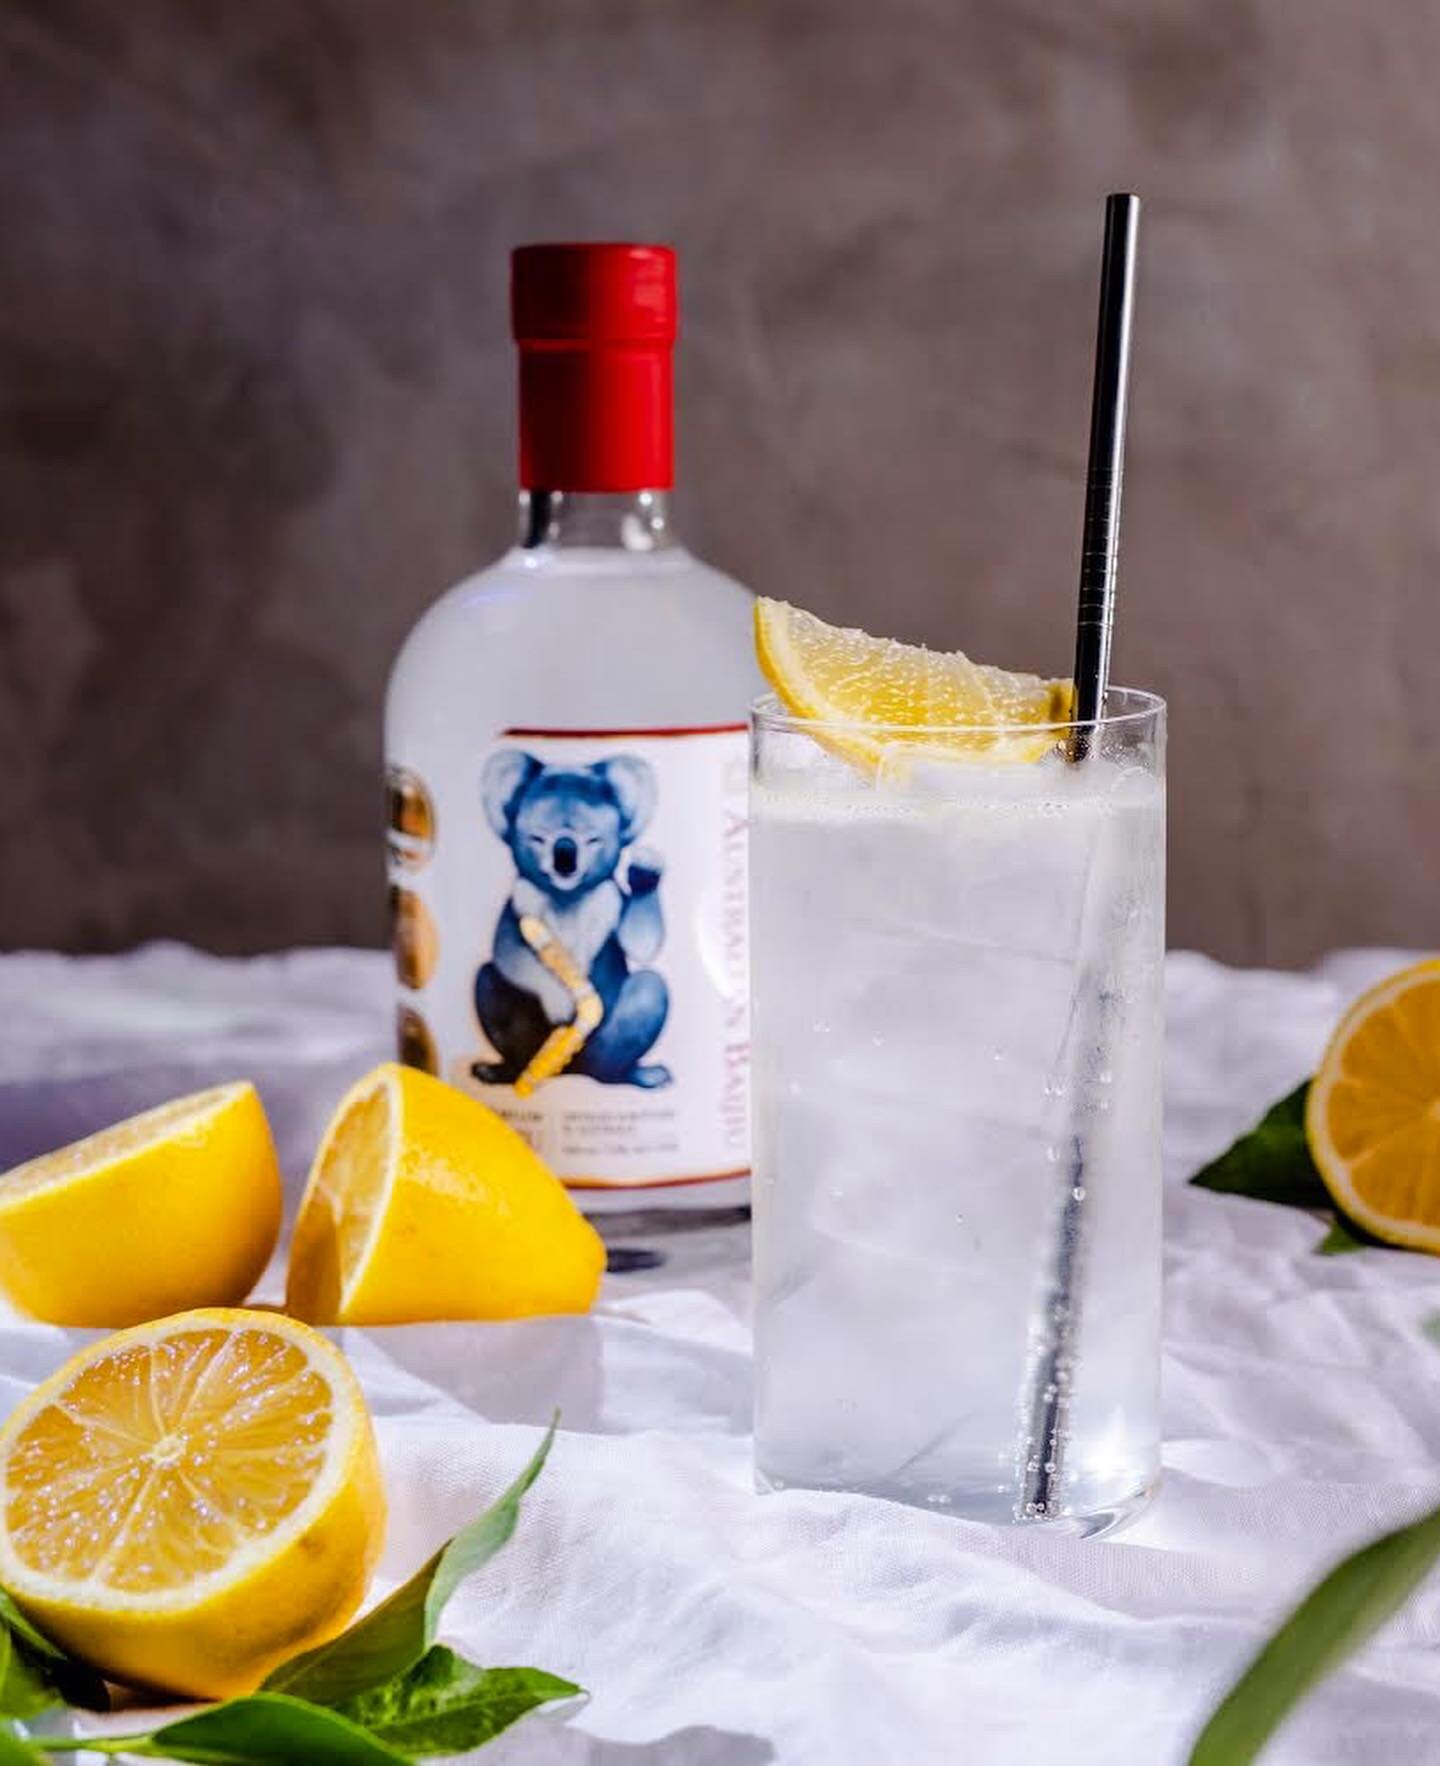 G&rsquo;day, friends. We hope your week is travelling well. This refreshing sparkling drink with hints of citrus practically invites you to sit back and relax.&nbsp;Scroll to see how to make it with Australian Baijiu. ((Shop in bio))

Cocktail &amp; 